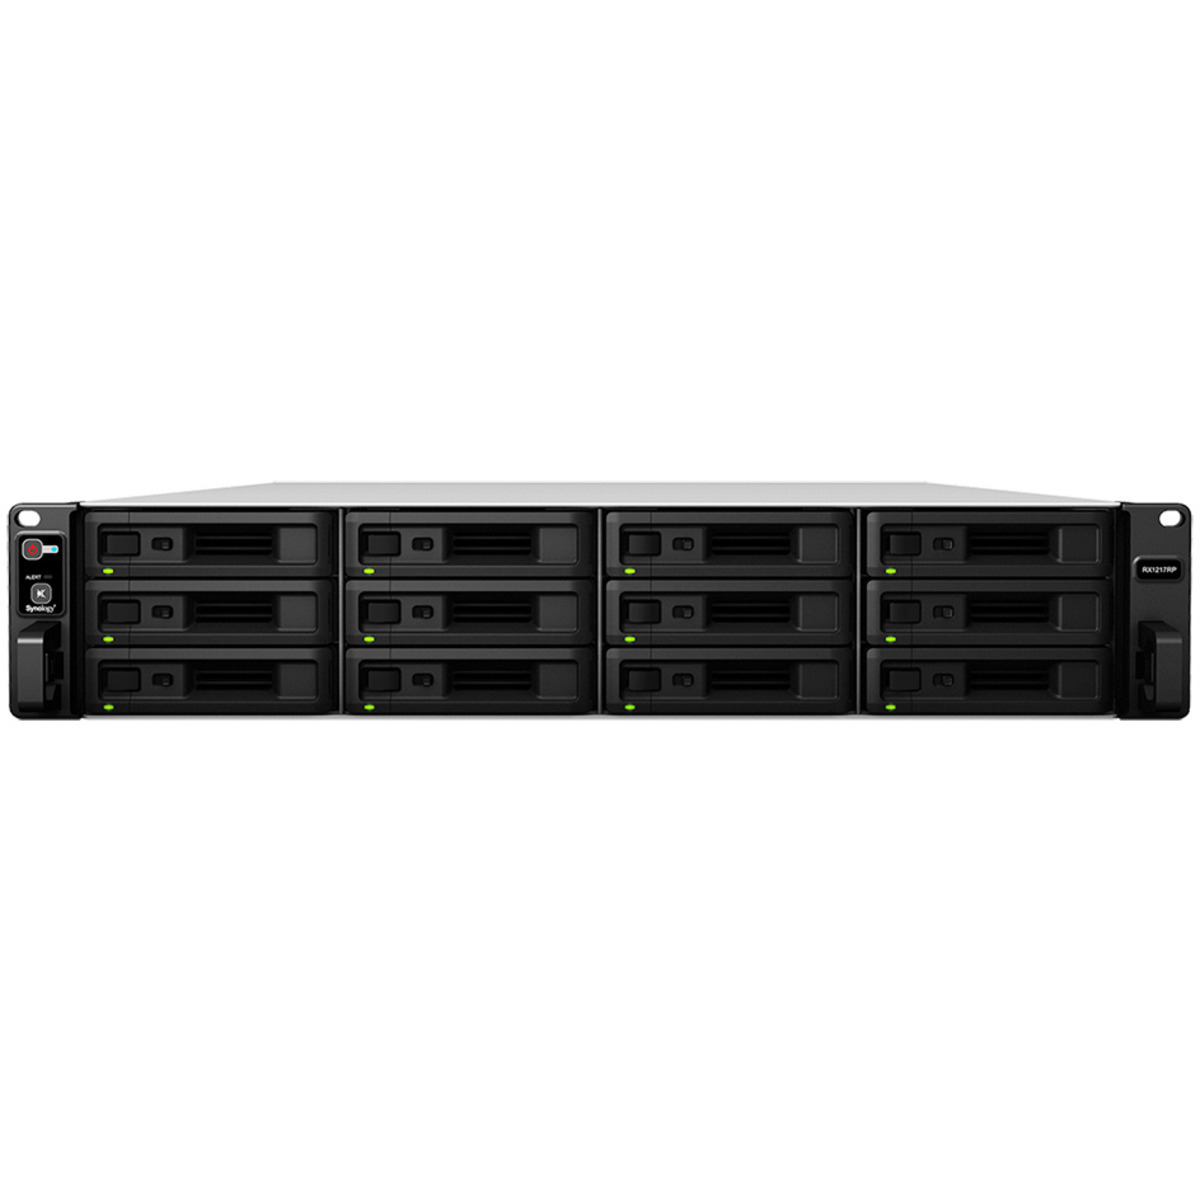 Synology RX1217 External Expansion Drive 132tb 12-Bay RackMount Large Business / Enterprise Expansion Enclosure 11x12tb Seagate IronWolf ST12000VN0008 3.5 7200rpm SATA 6Gb/s HDD NAS Class Drives Installed - Burn-In Tested RX1217 External Expansion Drive